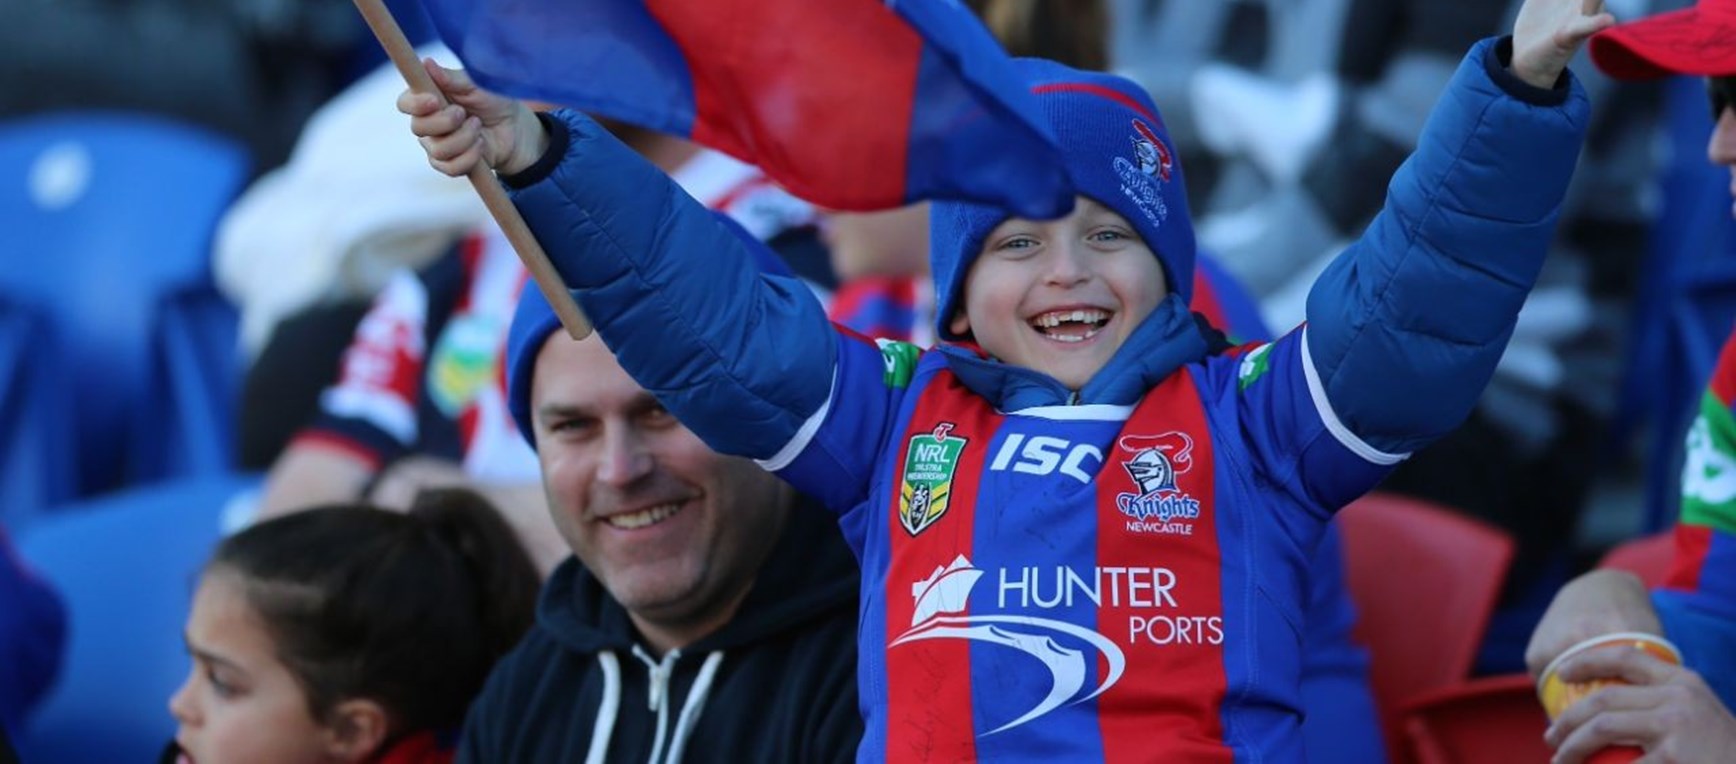 GALLERY | Fan focus at Knights games 